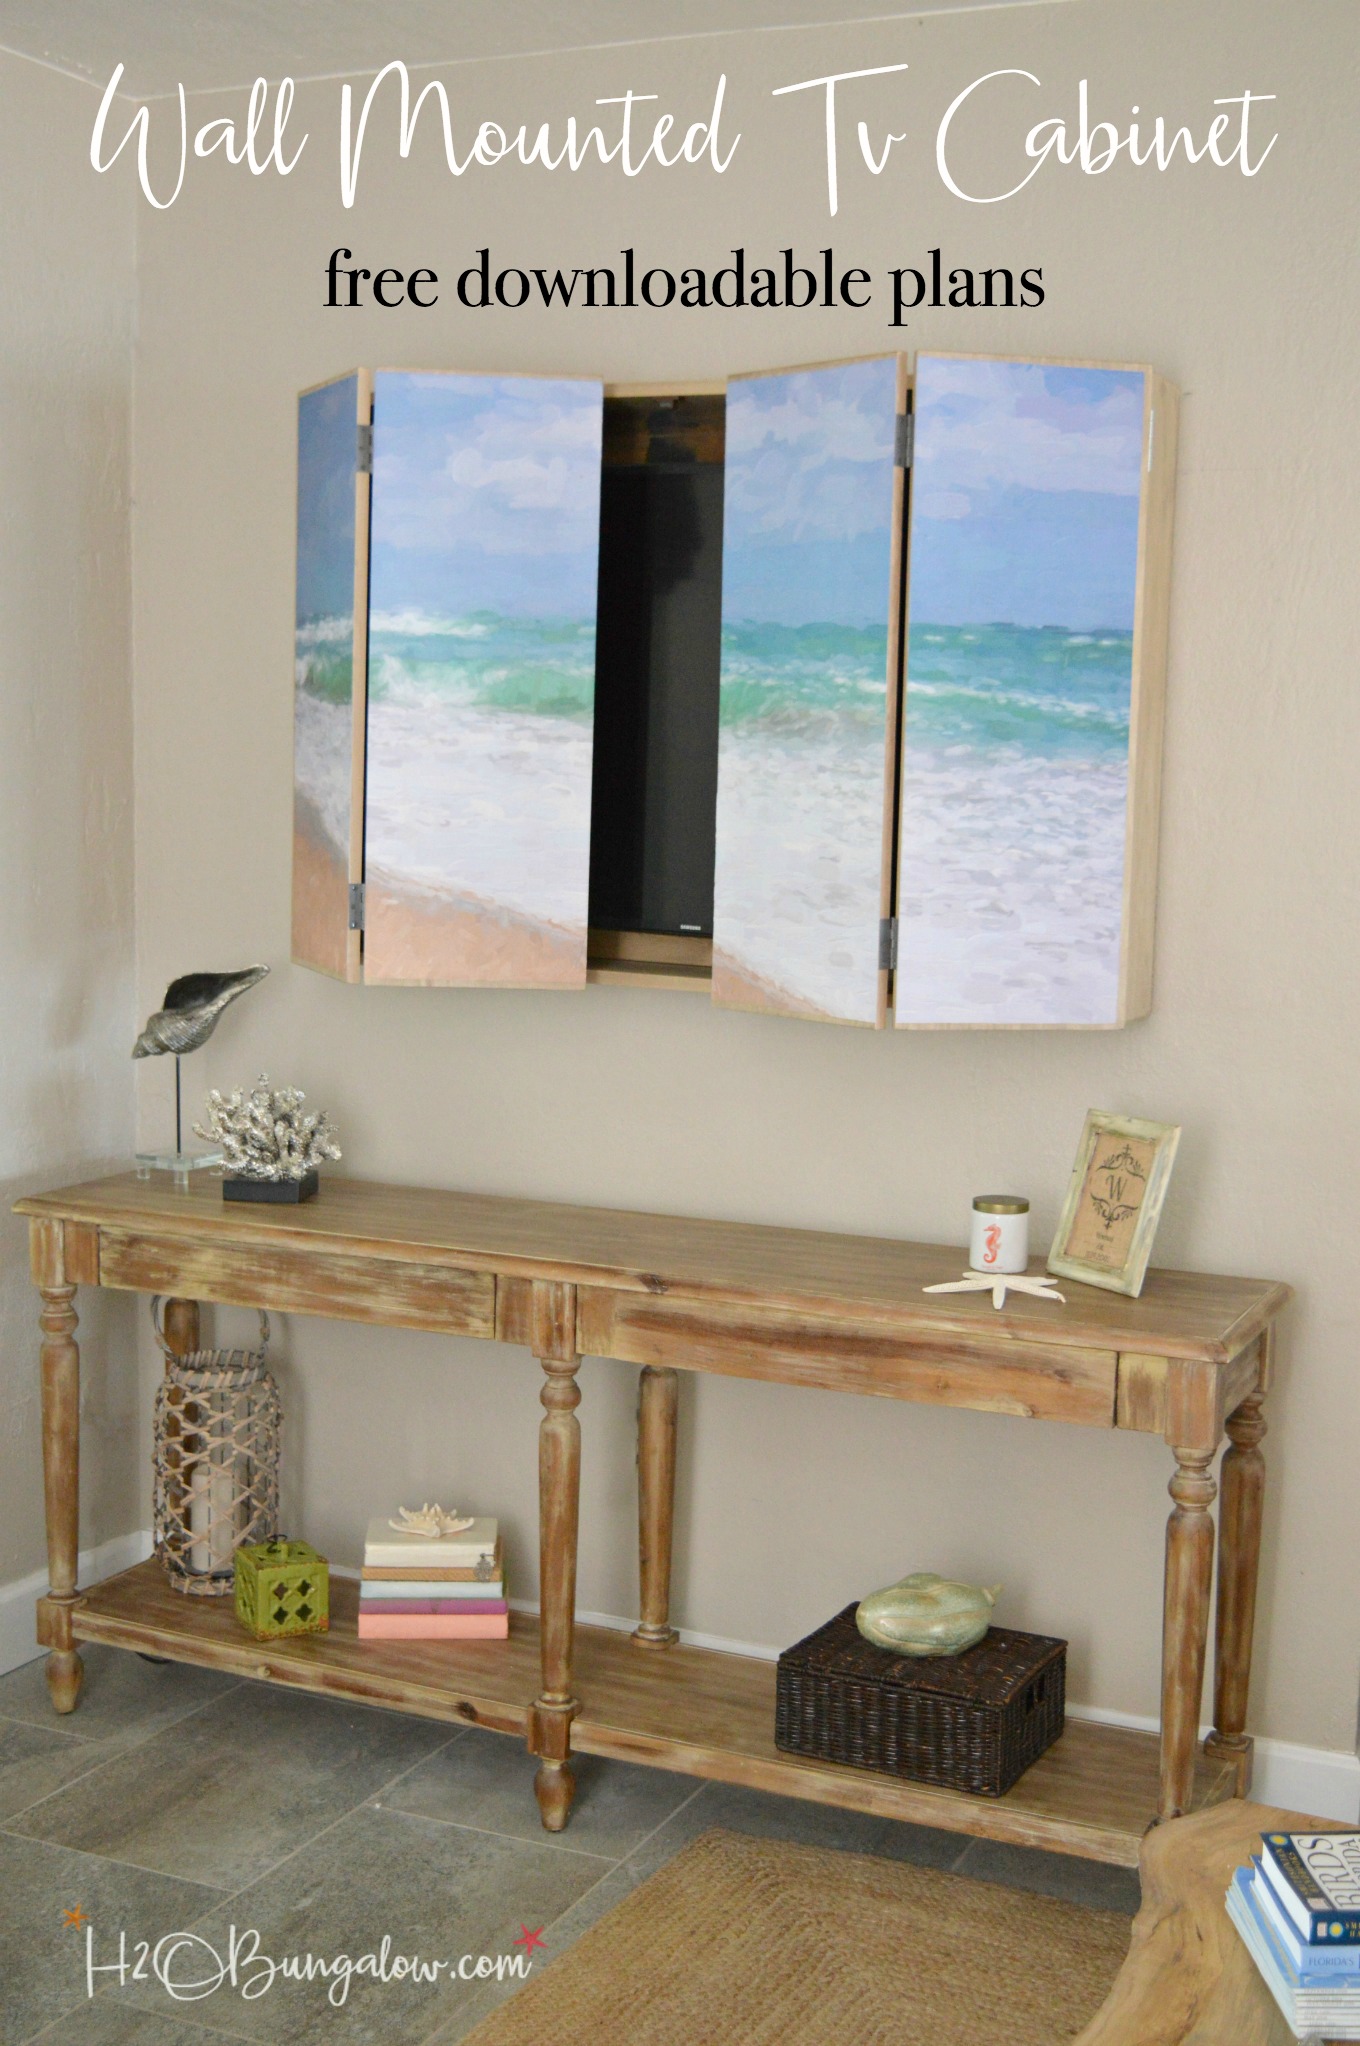 DIY Wall Mounted TV Cabinet with Free Plans - H20Bungalow